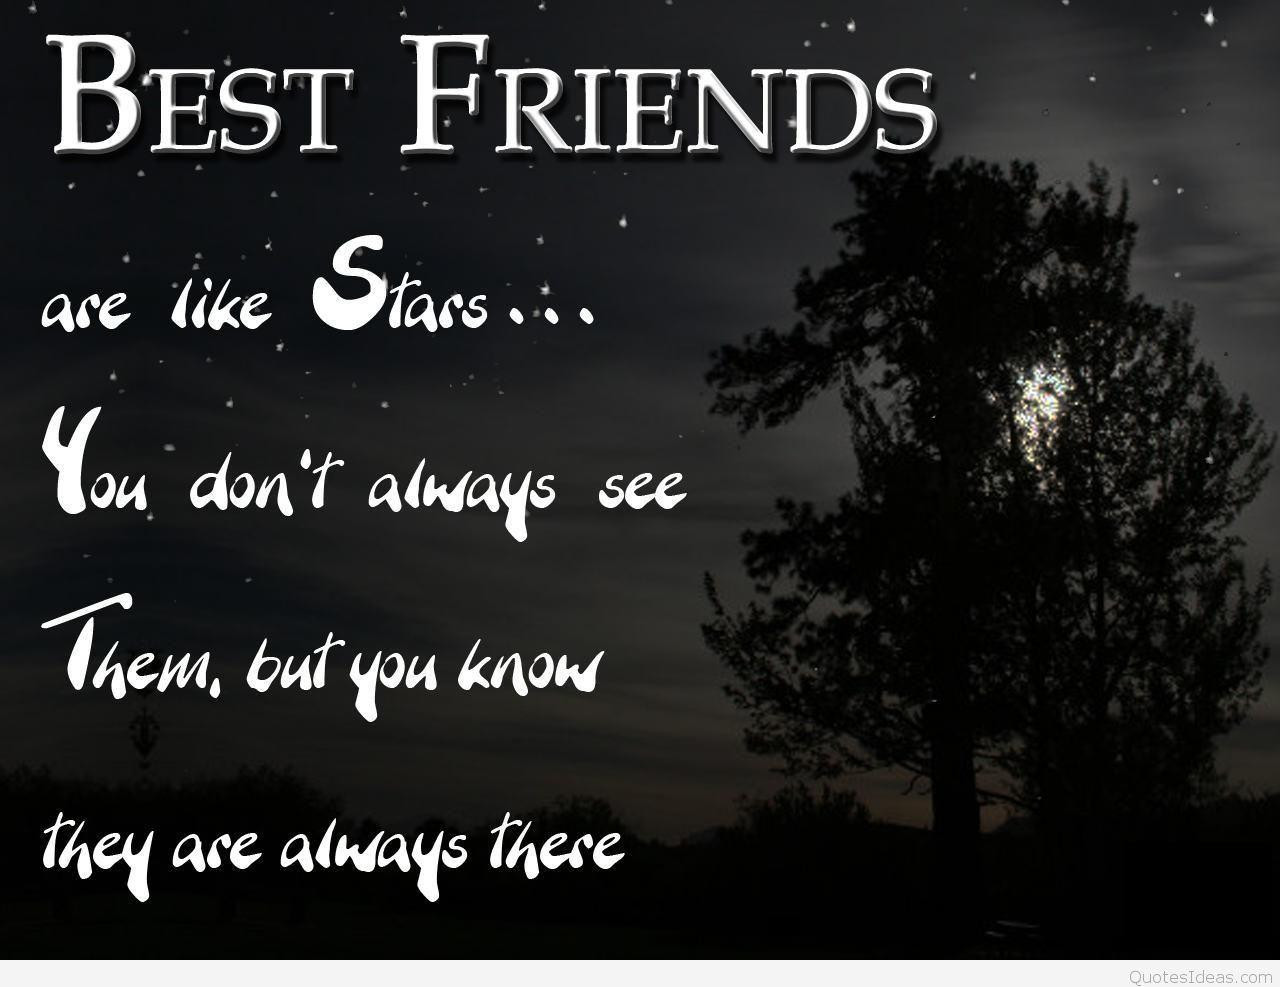 Friendship Quotes Wallpaper
 Best Friend Quotes Wallpapers Wallpaper Cave